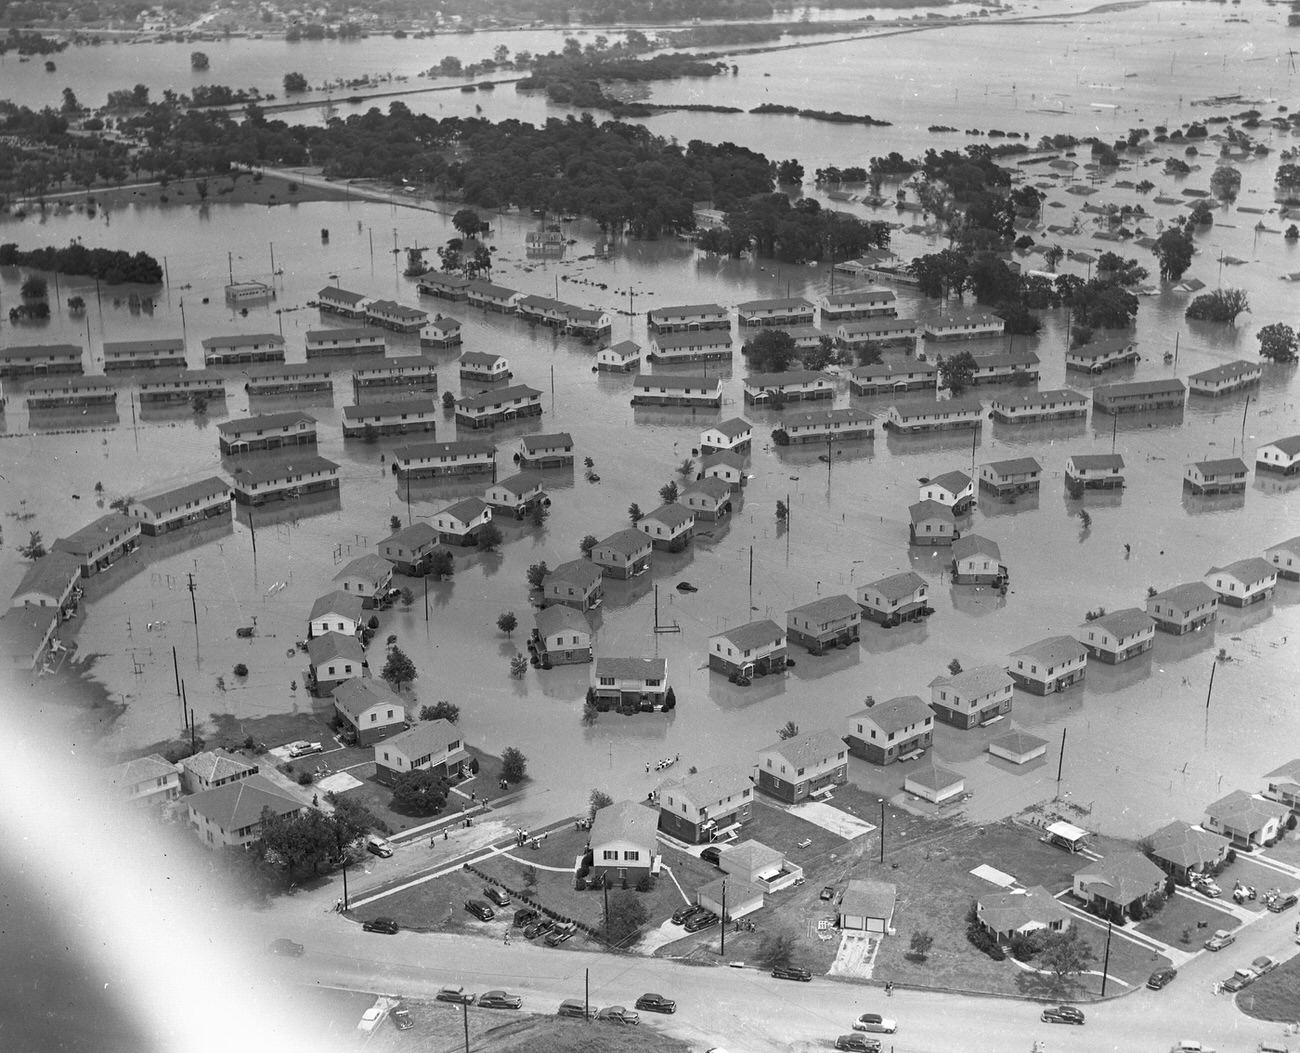 Fort Worth, Texas, flood of 1949, showing a flooded neighborhood. There are few cars on the roads that have not been completely flooded. Groups of people are gathered in front of their homes and in the streets.